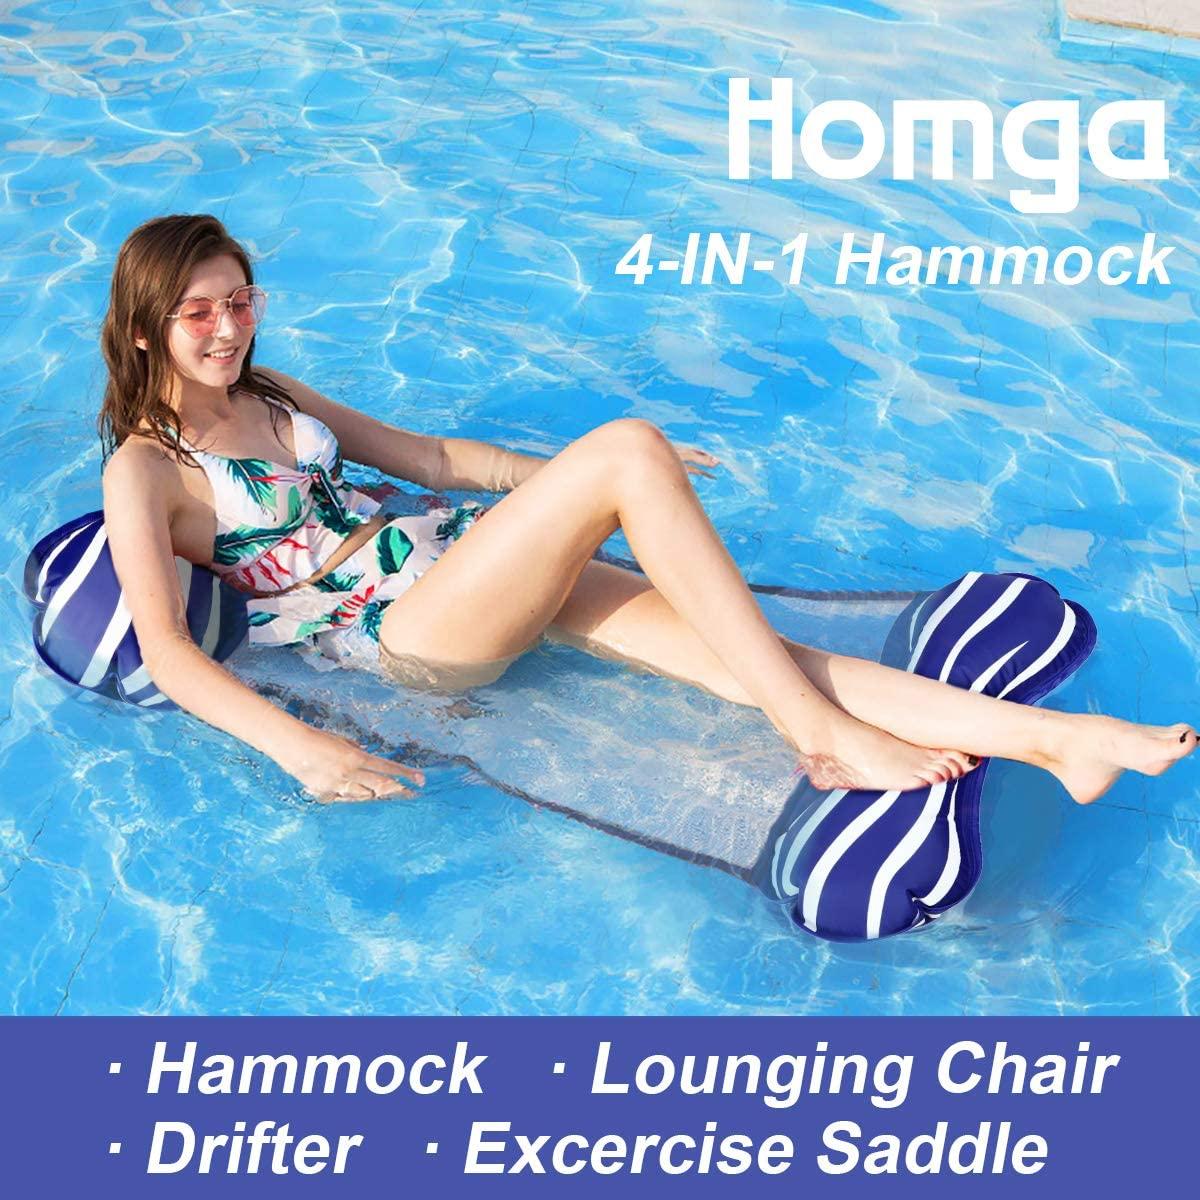 Homga 4-in-1 Inflatable Water Hammock for $5.09